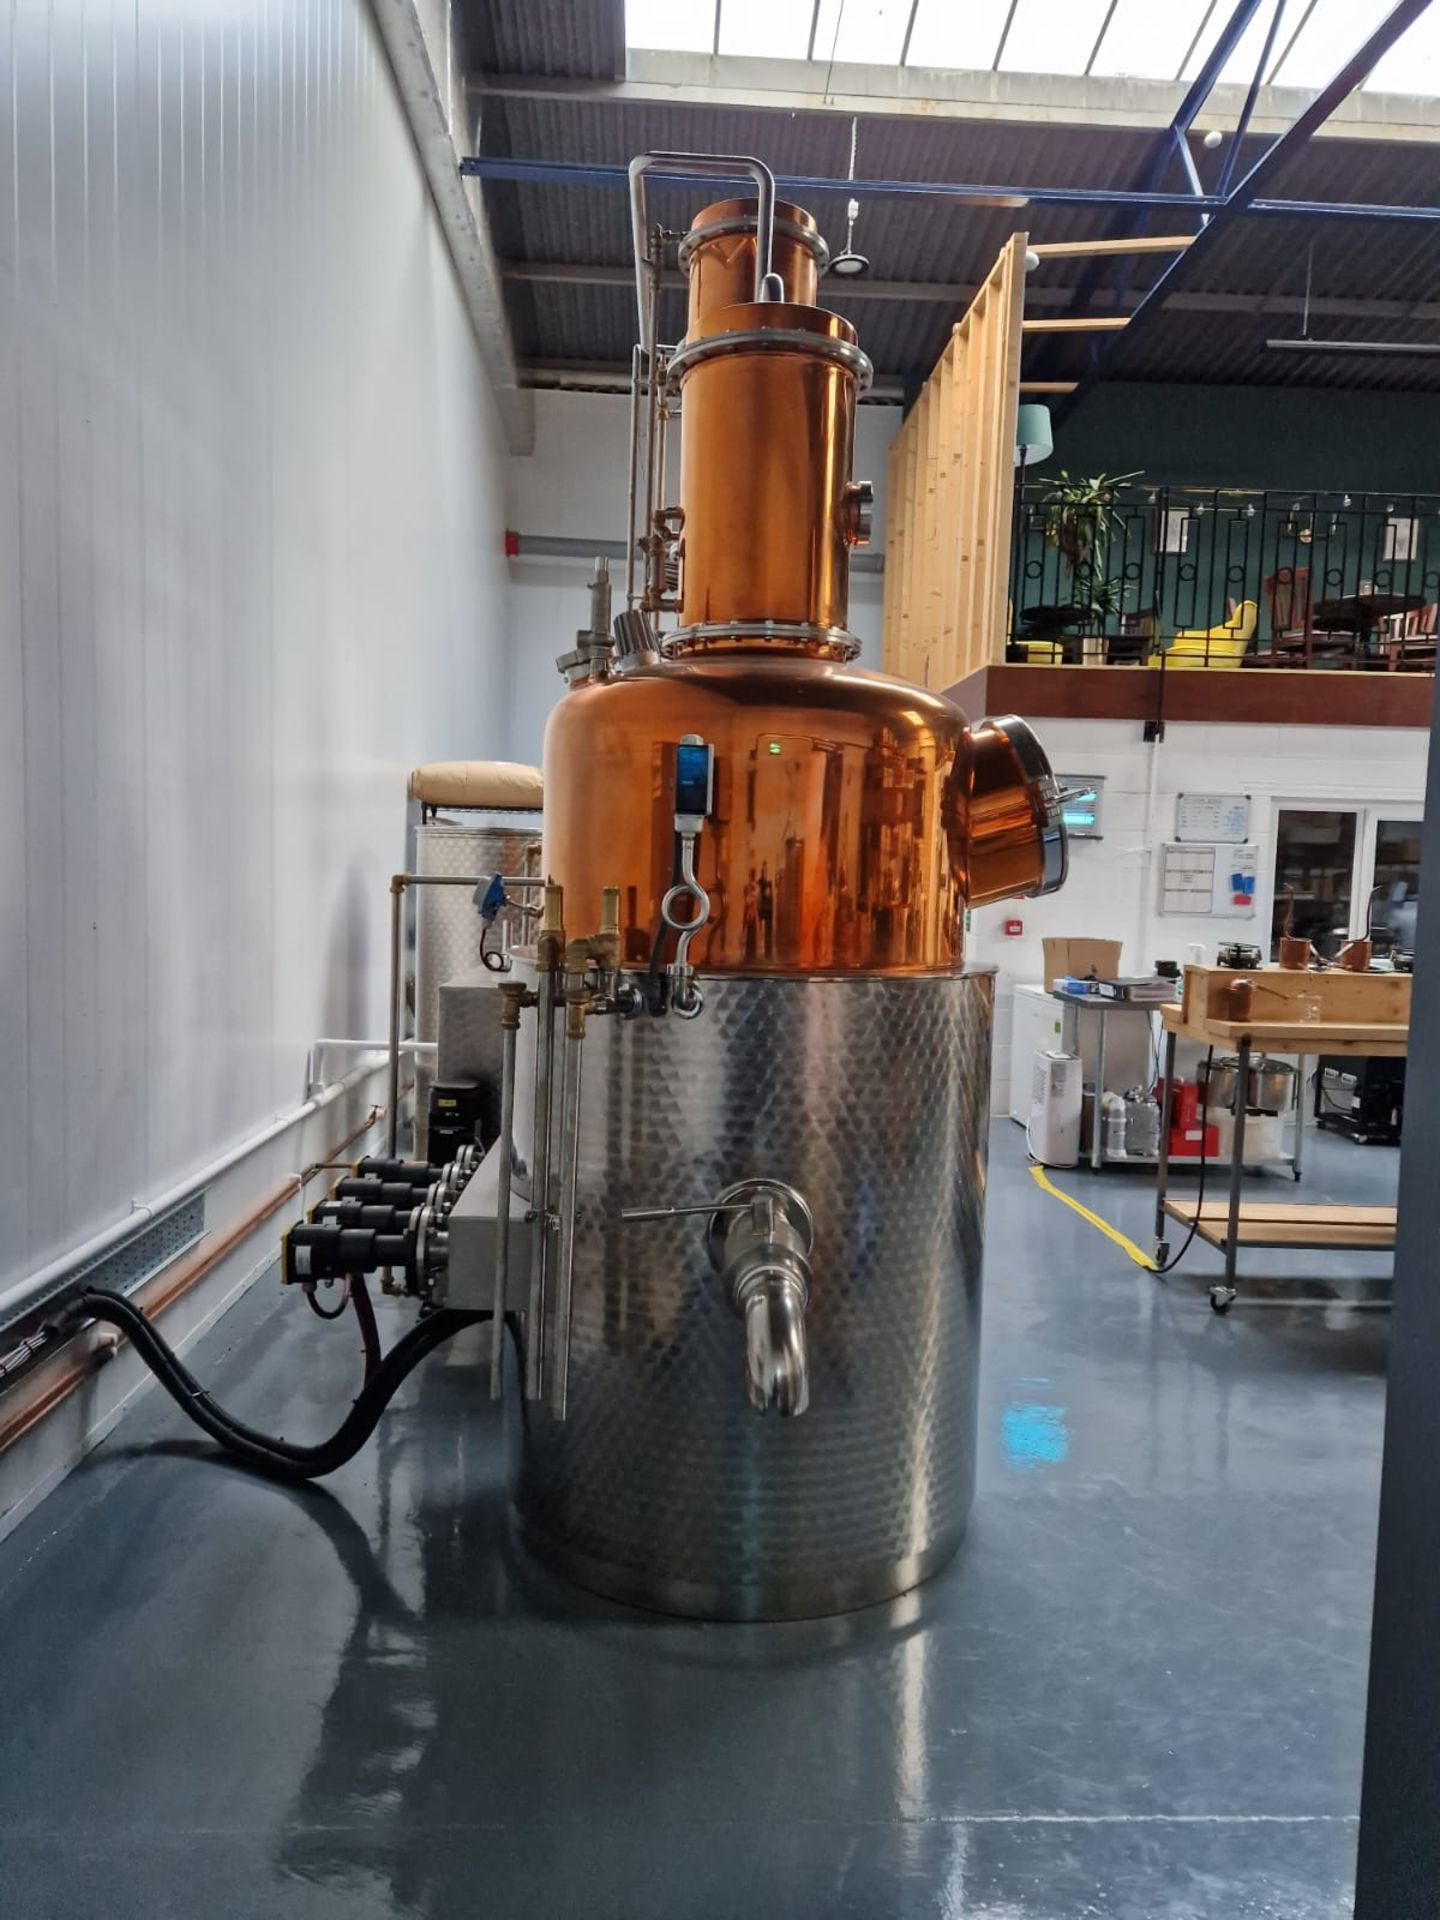 Arnold Holstein SH1000, 450L Pot Still. Installed and commissioned March 2022 - Image 6 of 9